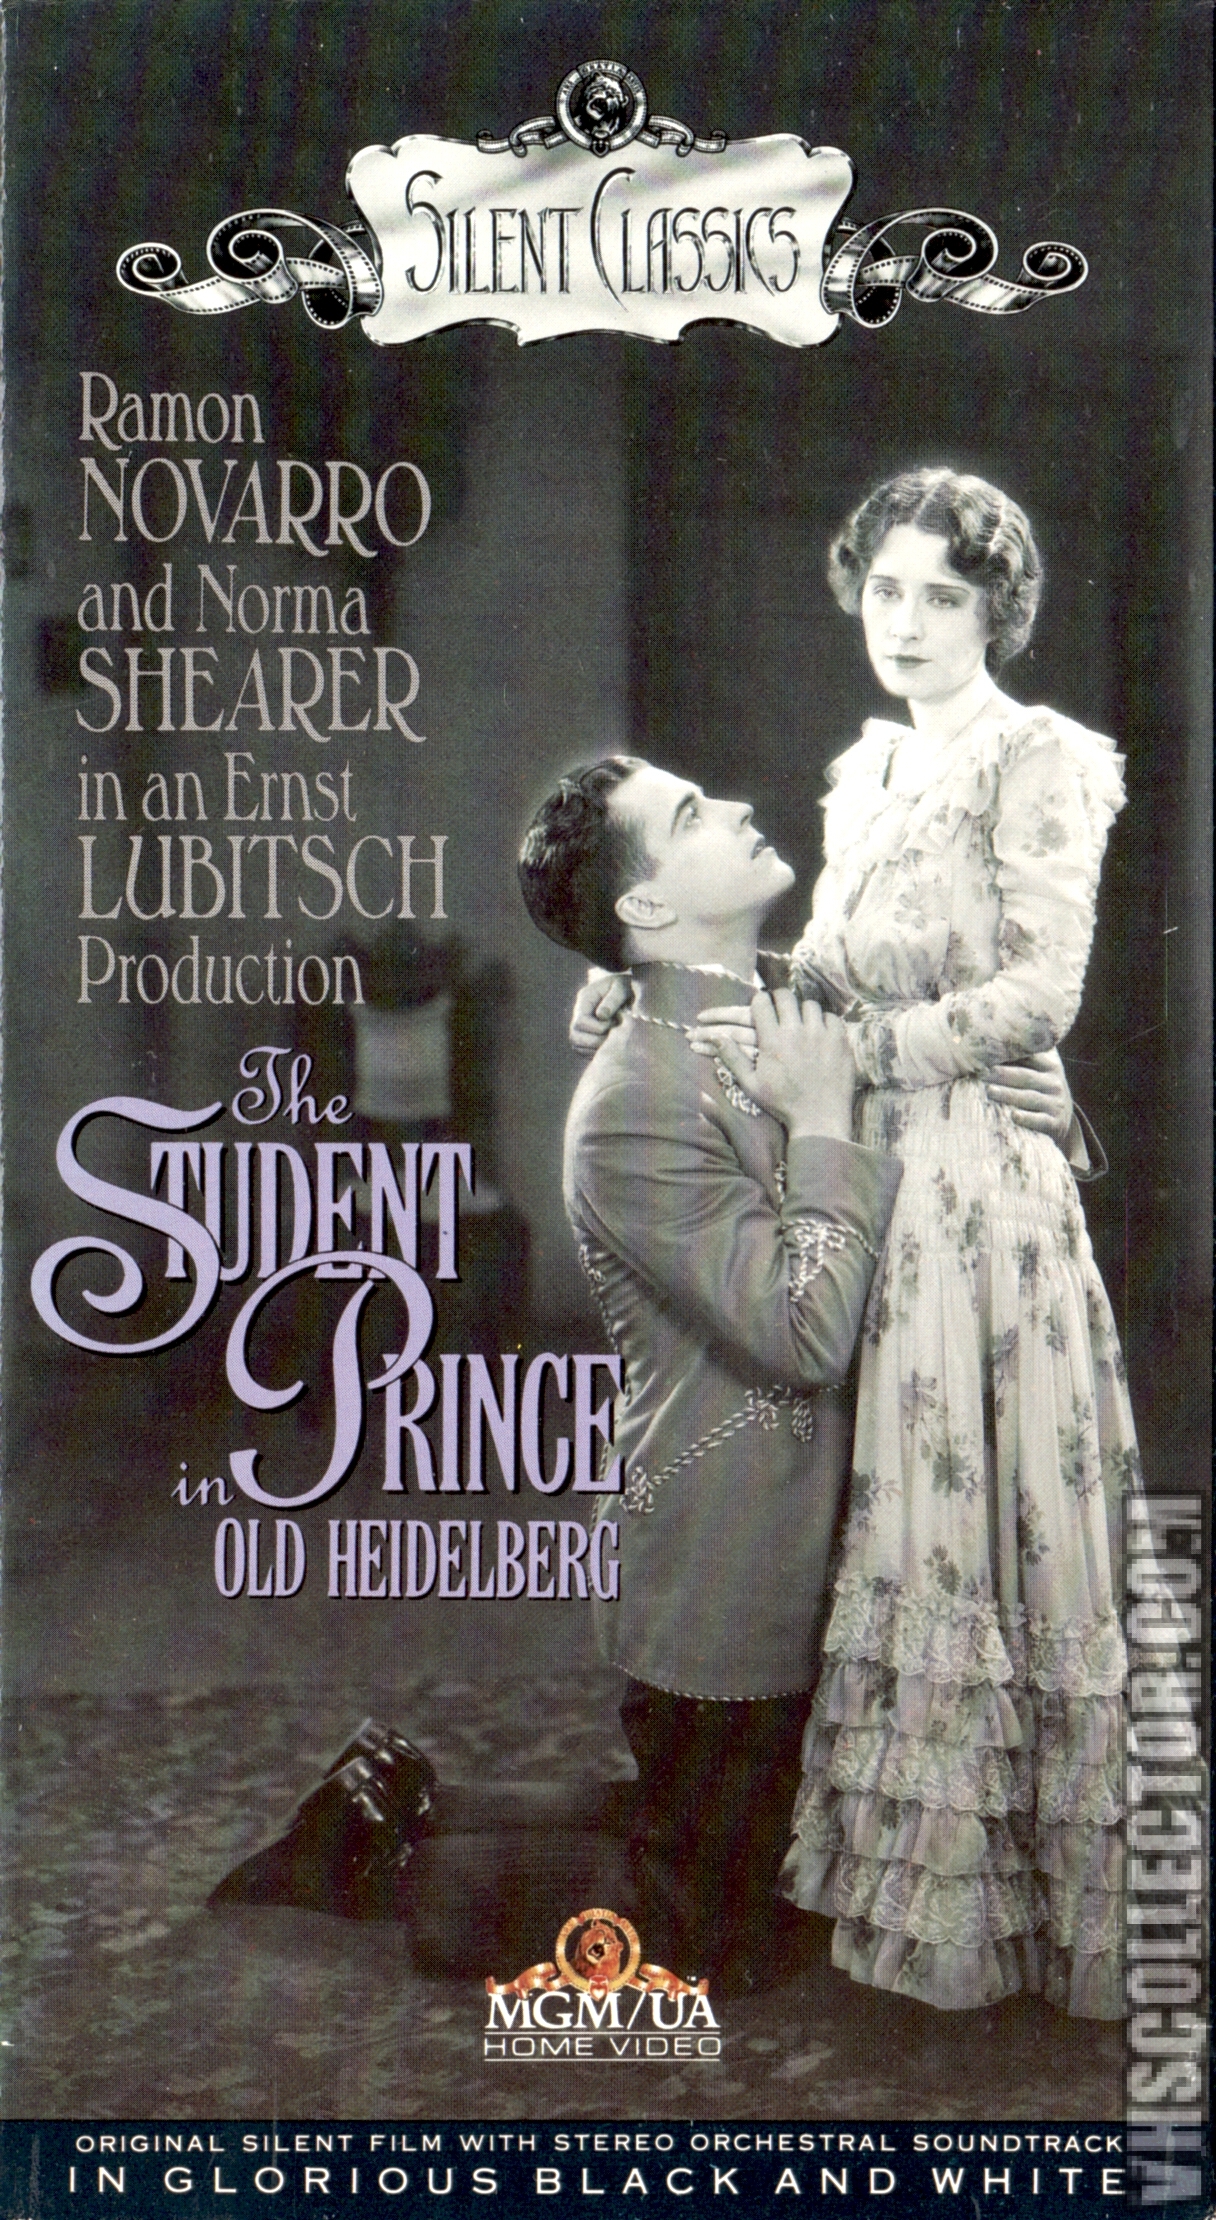 The Student Prince in Old Heidelberg | VHSCollector.com